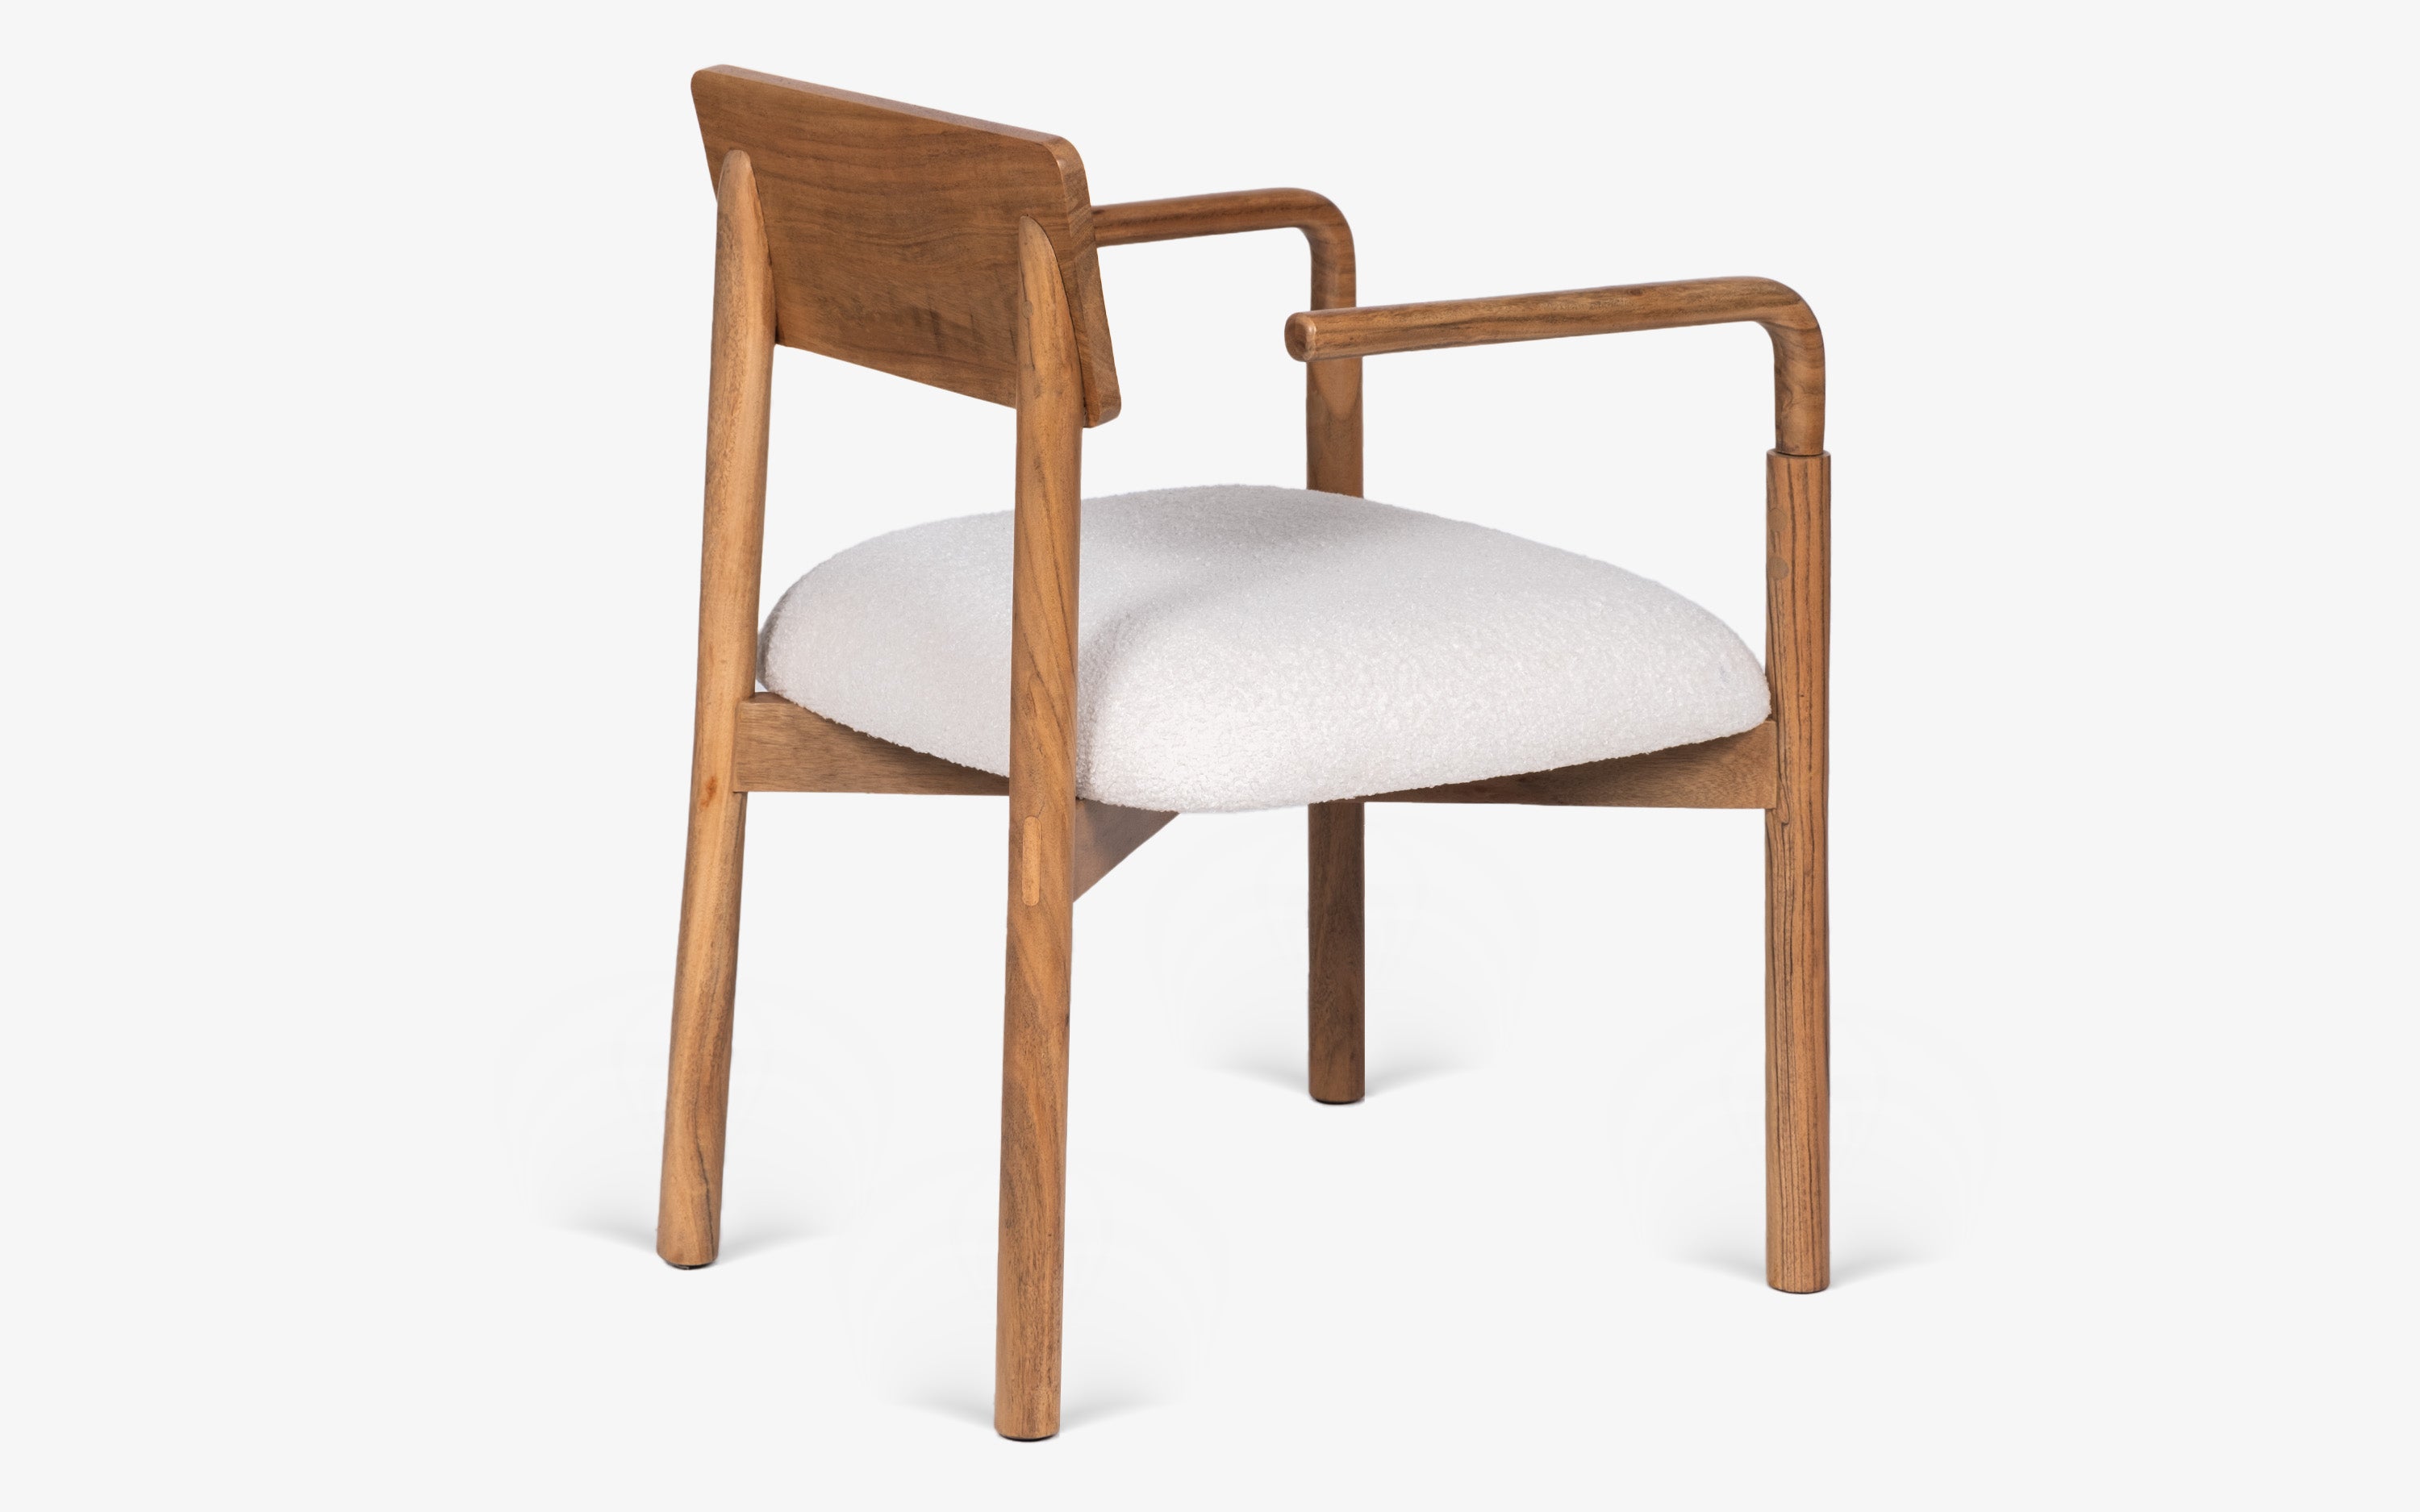 Andaman rest chair wooden. Andaman resting chair wooden. OT Home